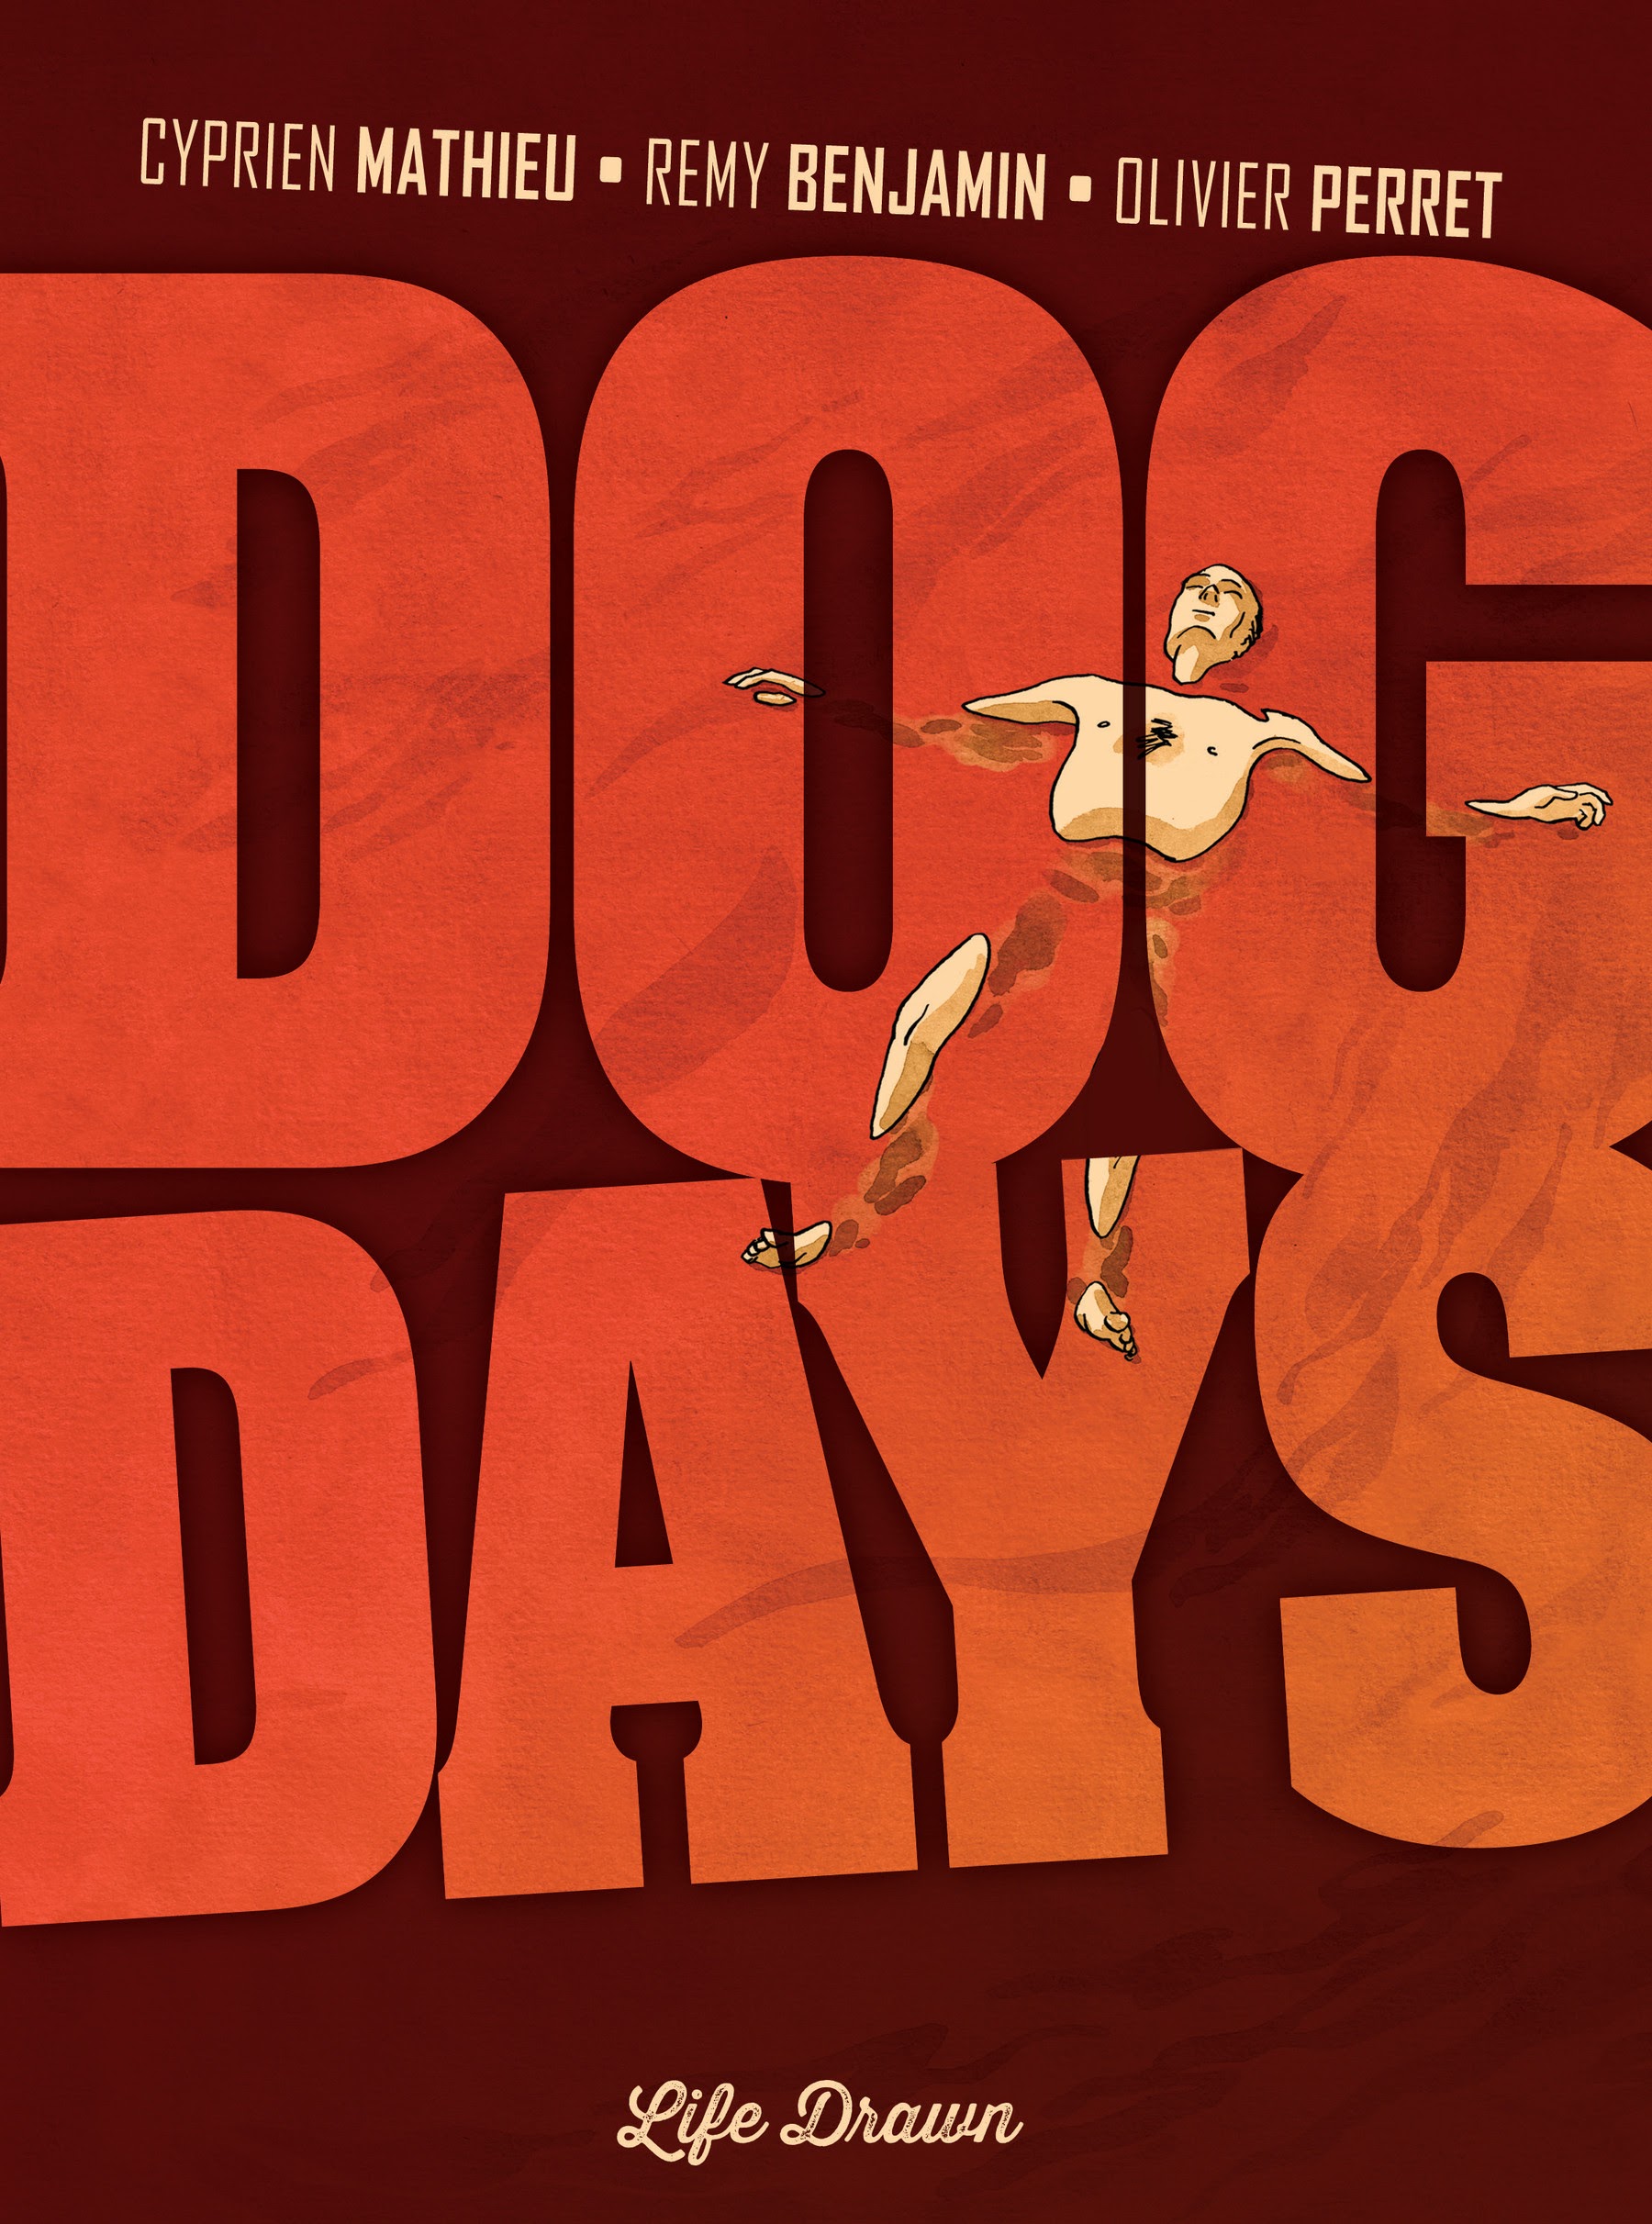 Read online Dog Days comic -  Issue # TPB - 1